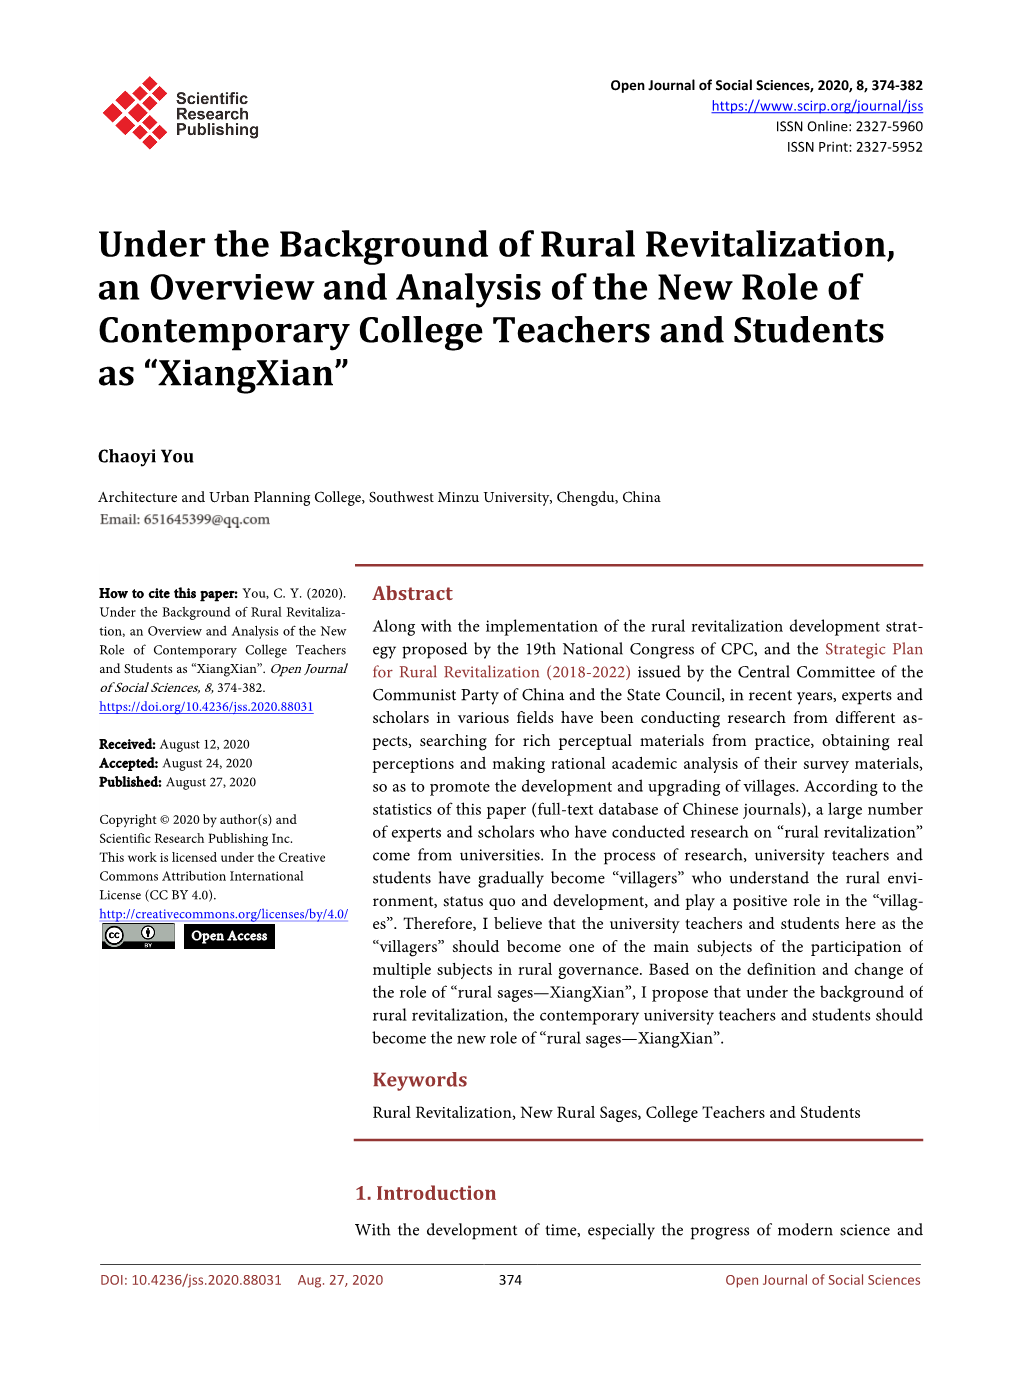 Under the Background of Rural Revitalization, an Overview and Analysis of the New Role of Contemporary College Teachers and Students As “Xiangxian”